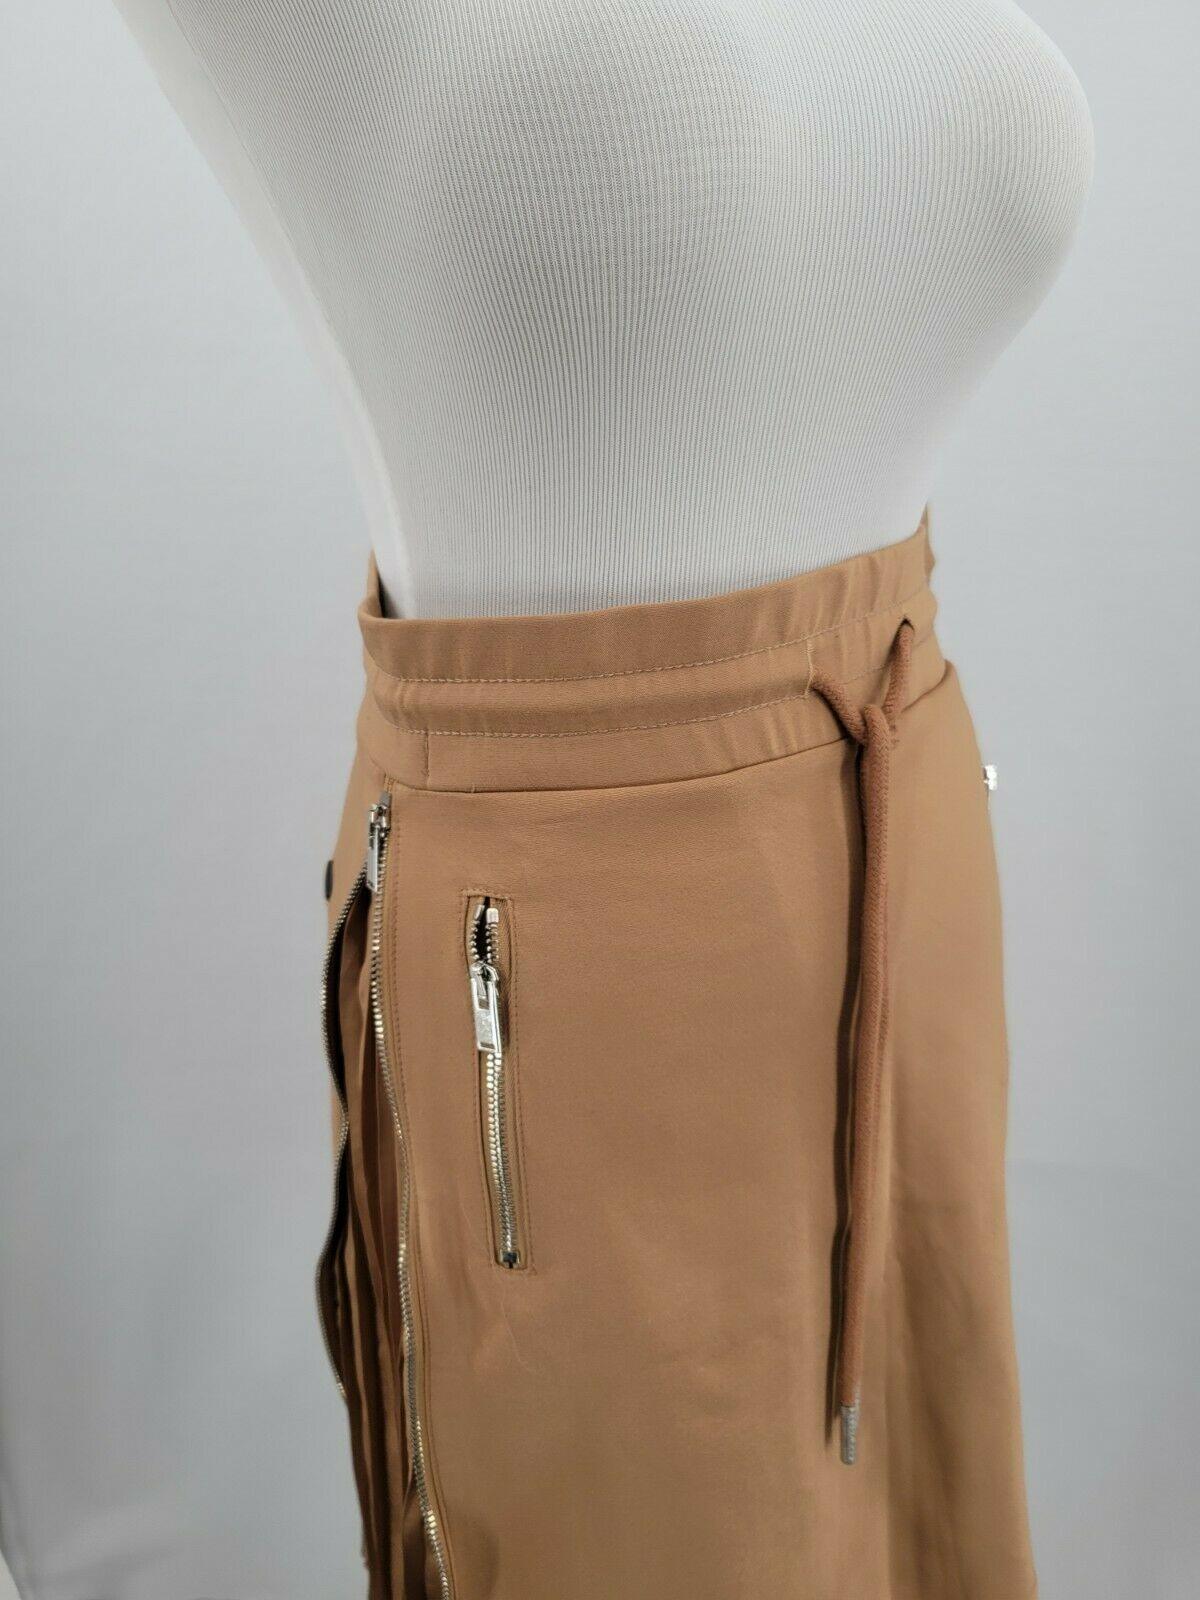 Elias Rumelis JOY Women Camel Casual Skirt With Zipper and Pleated Side XS - SVNYFancy